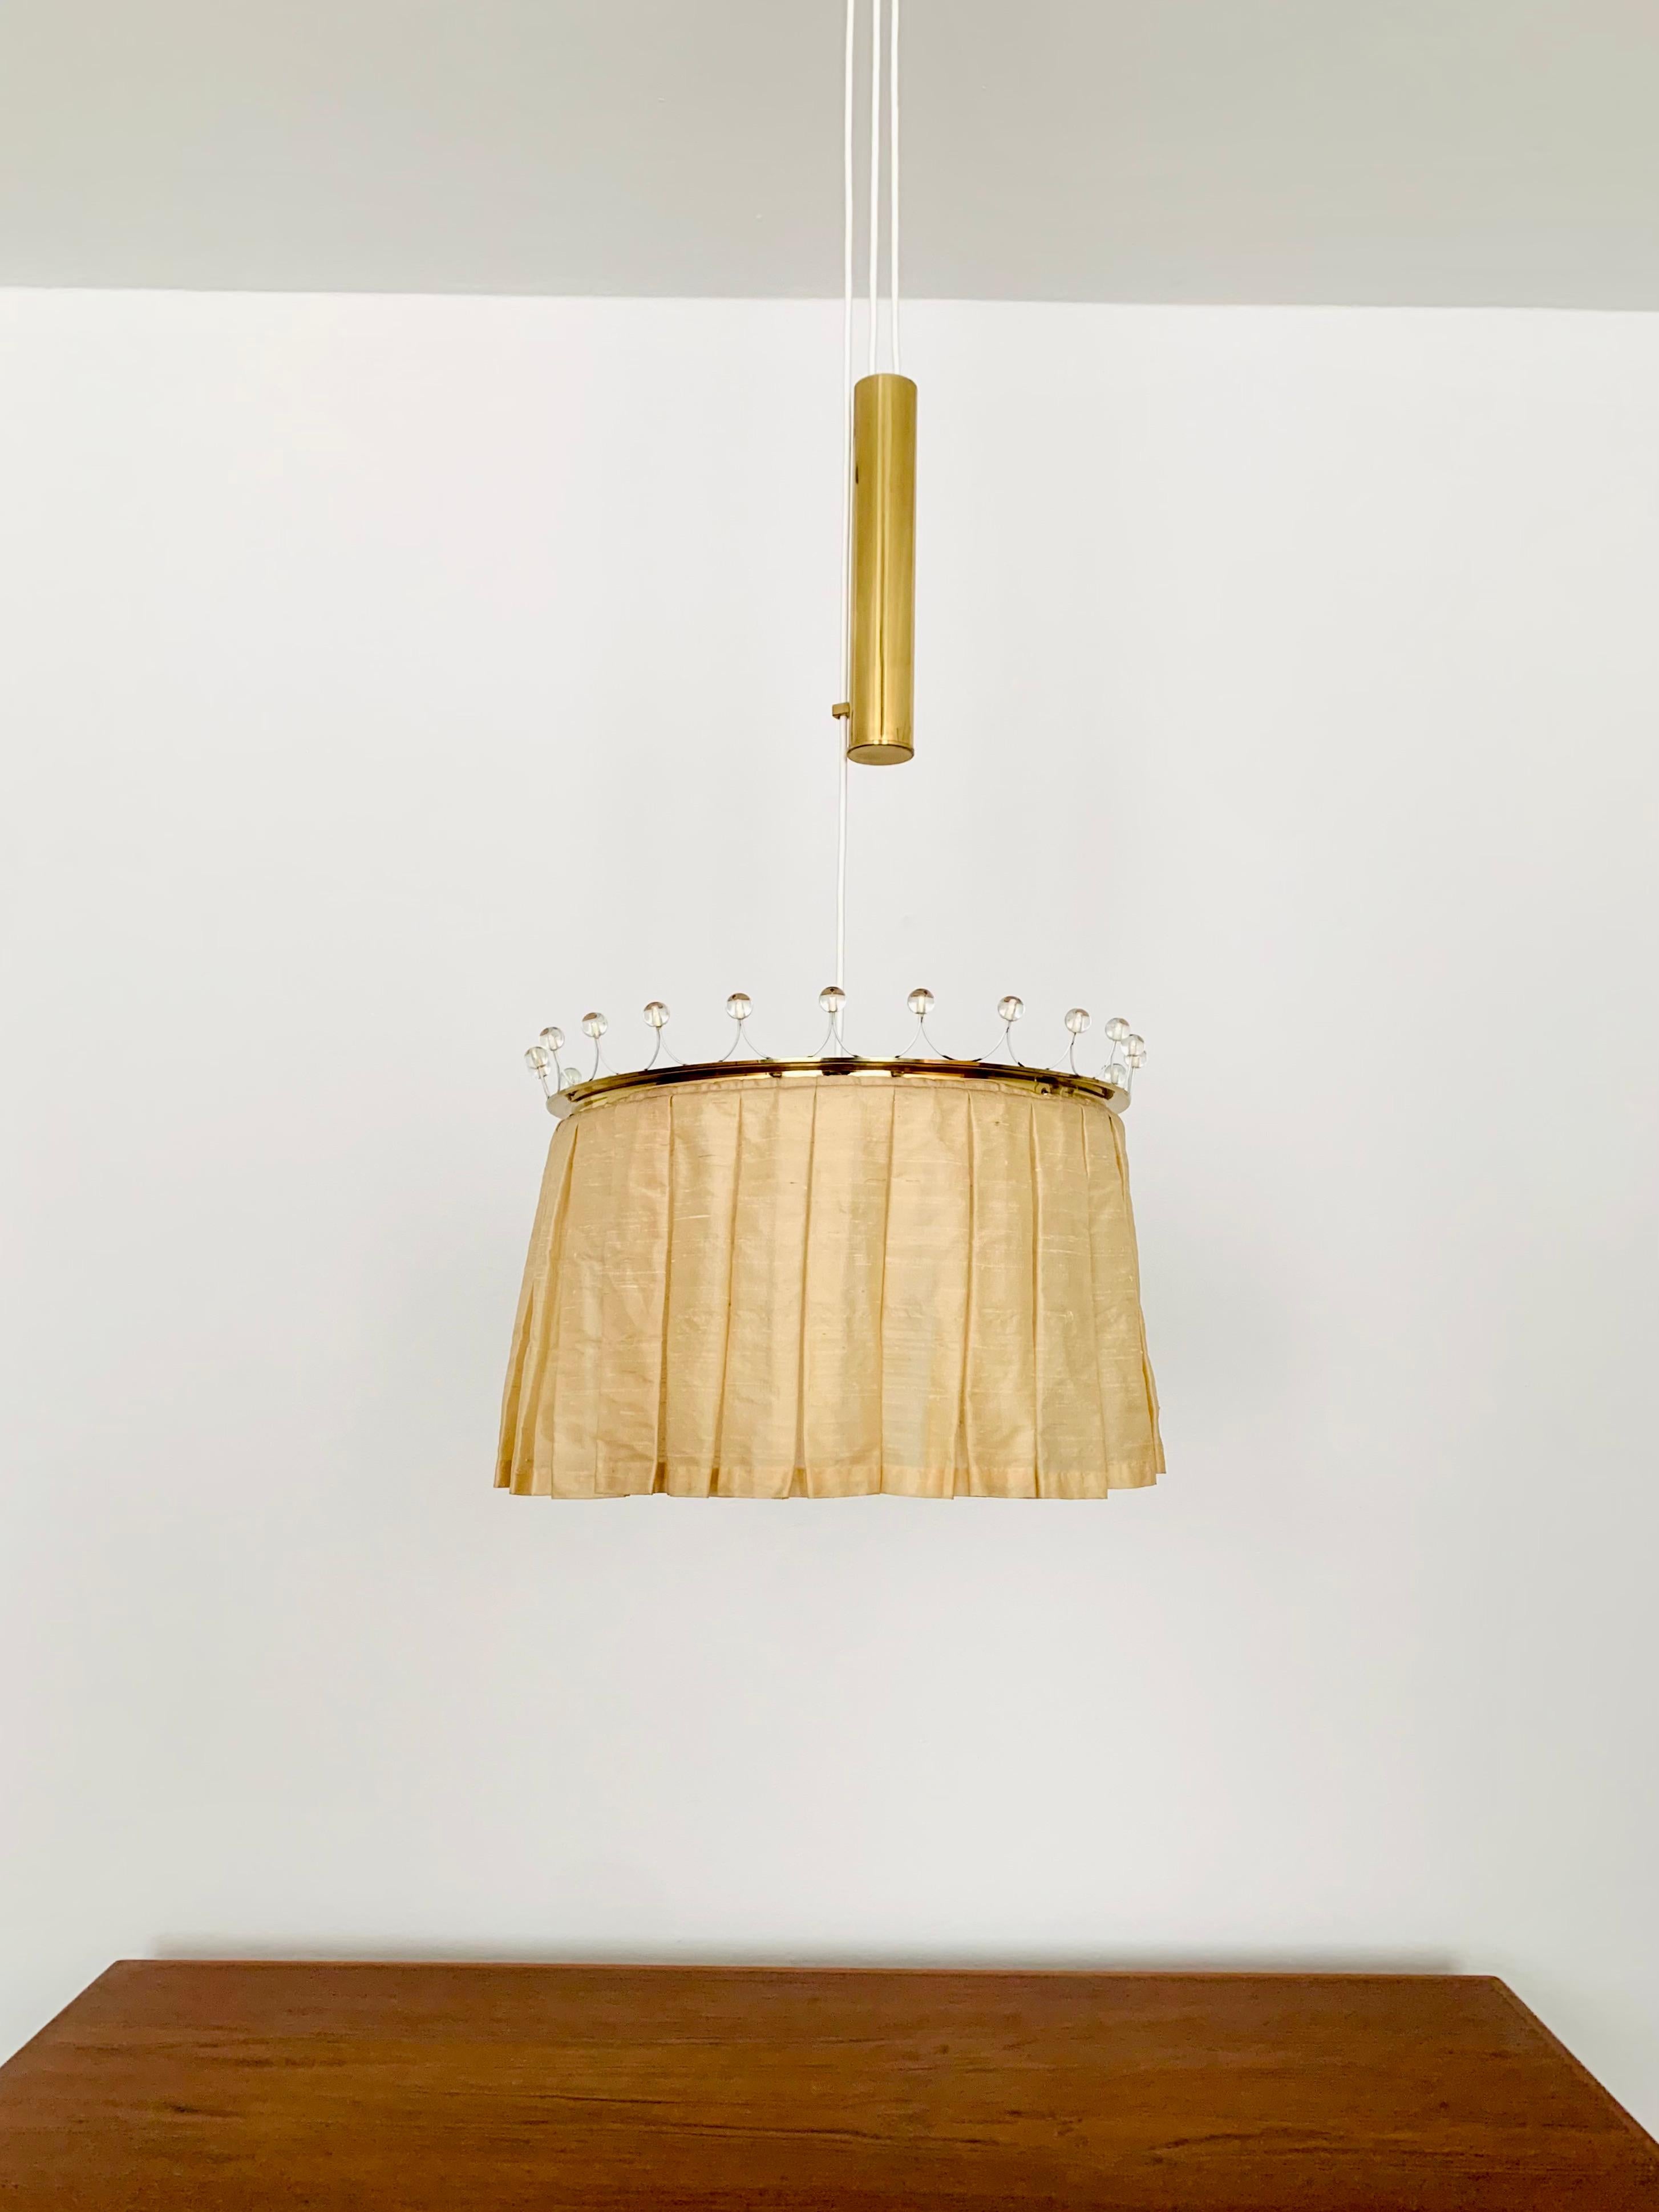 Very rare height-adjustable pendant lamp from the 1950s.
High-quality materials such as silk, brass and crystal glass make the lamp a special design object.
A very cozy light is created.

Manufacturer: Vereinigte Werkstätten